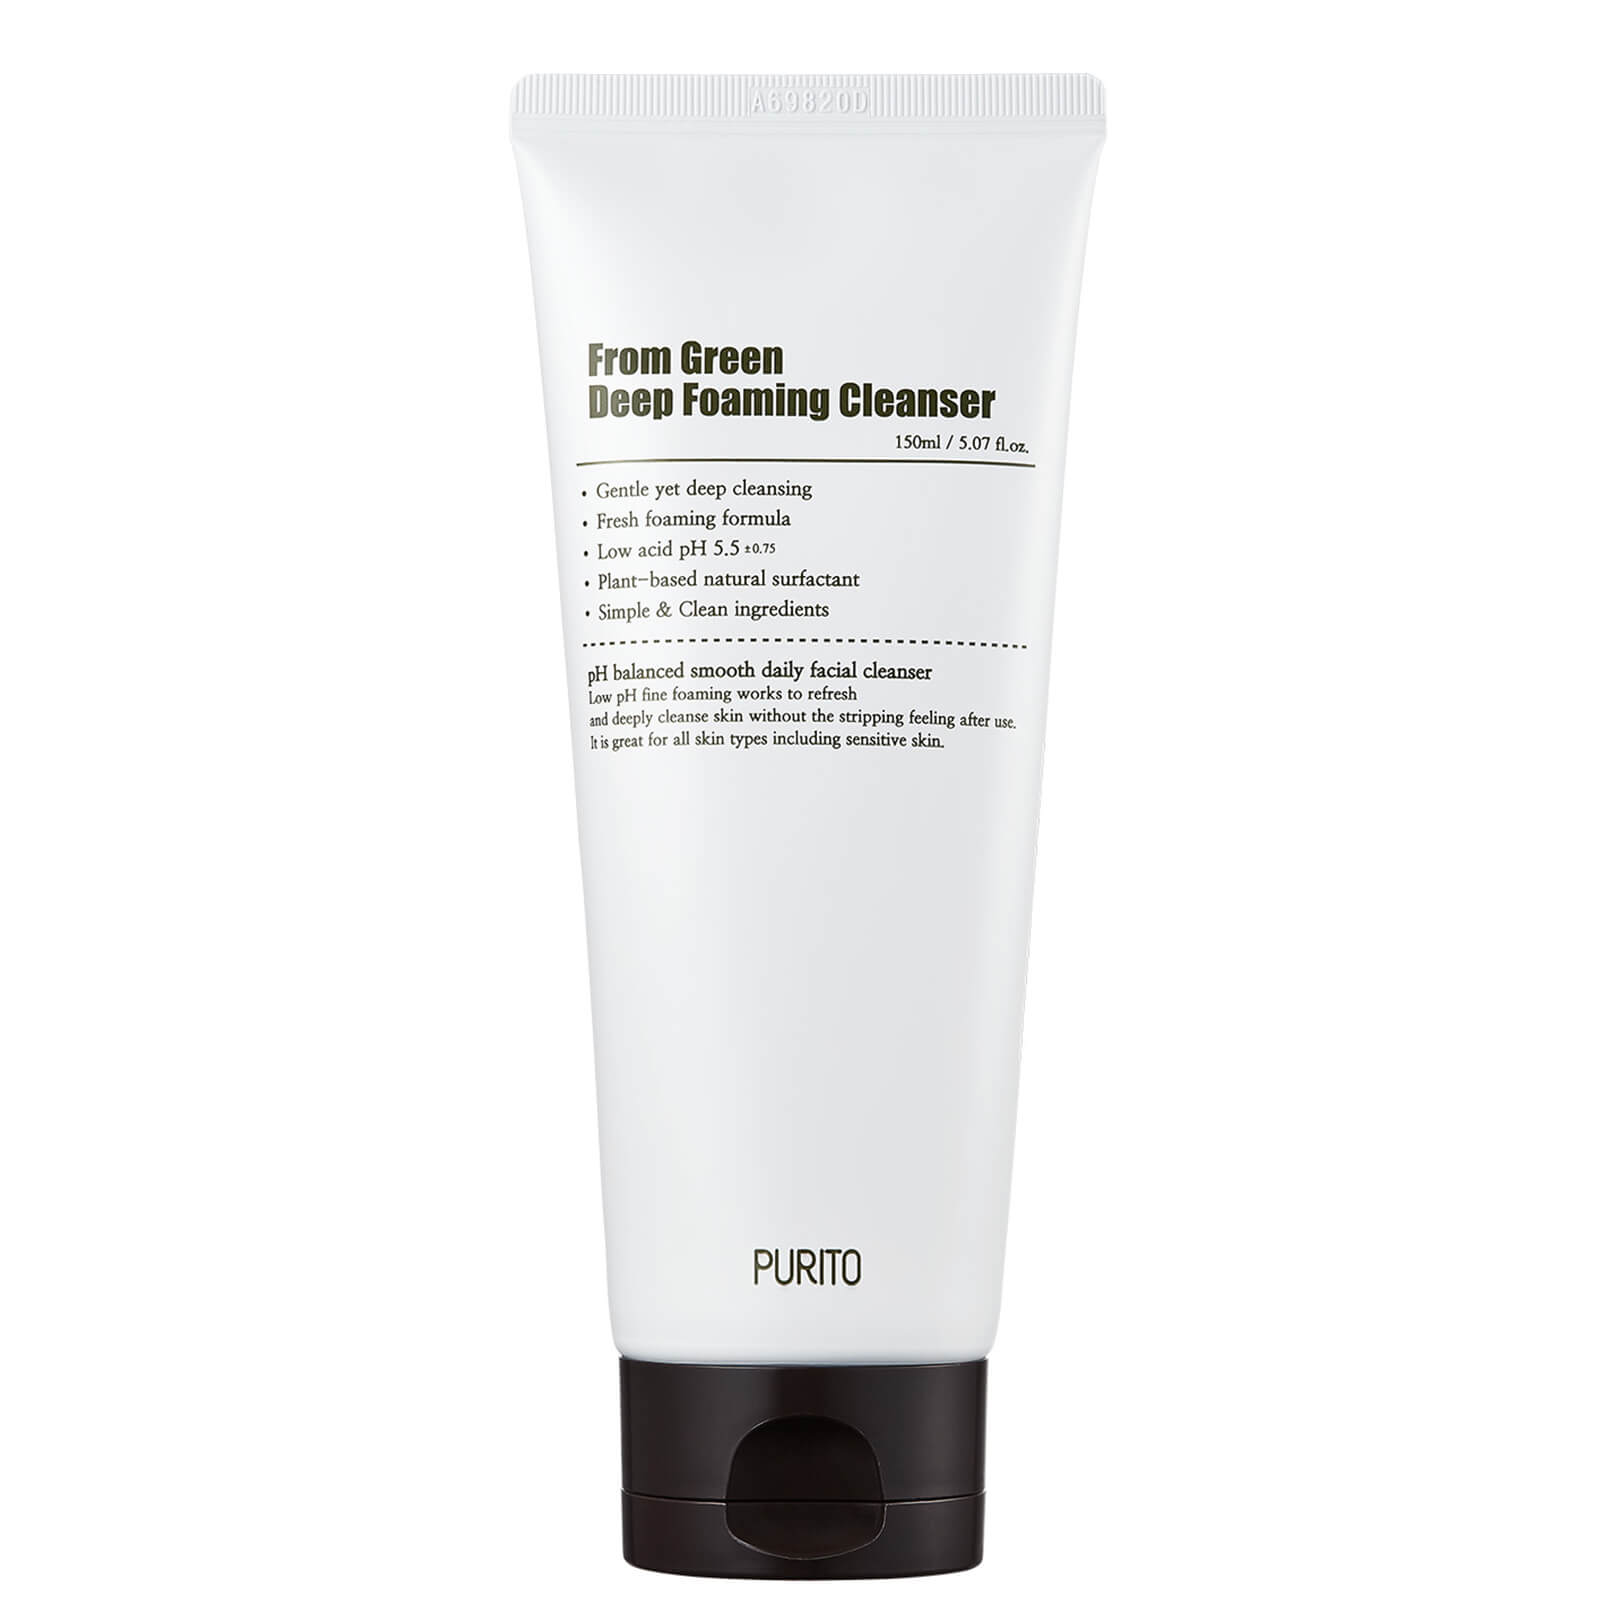 PURITO From Green Deep Foaming Cleanser 150ml